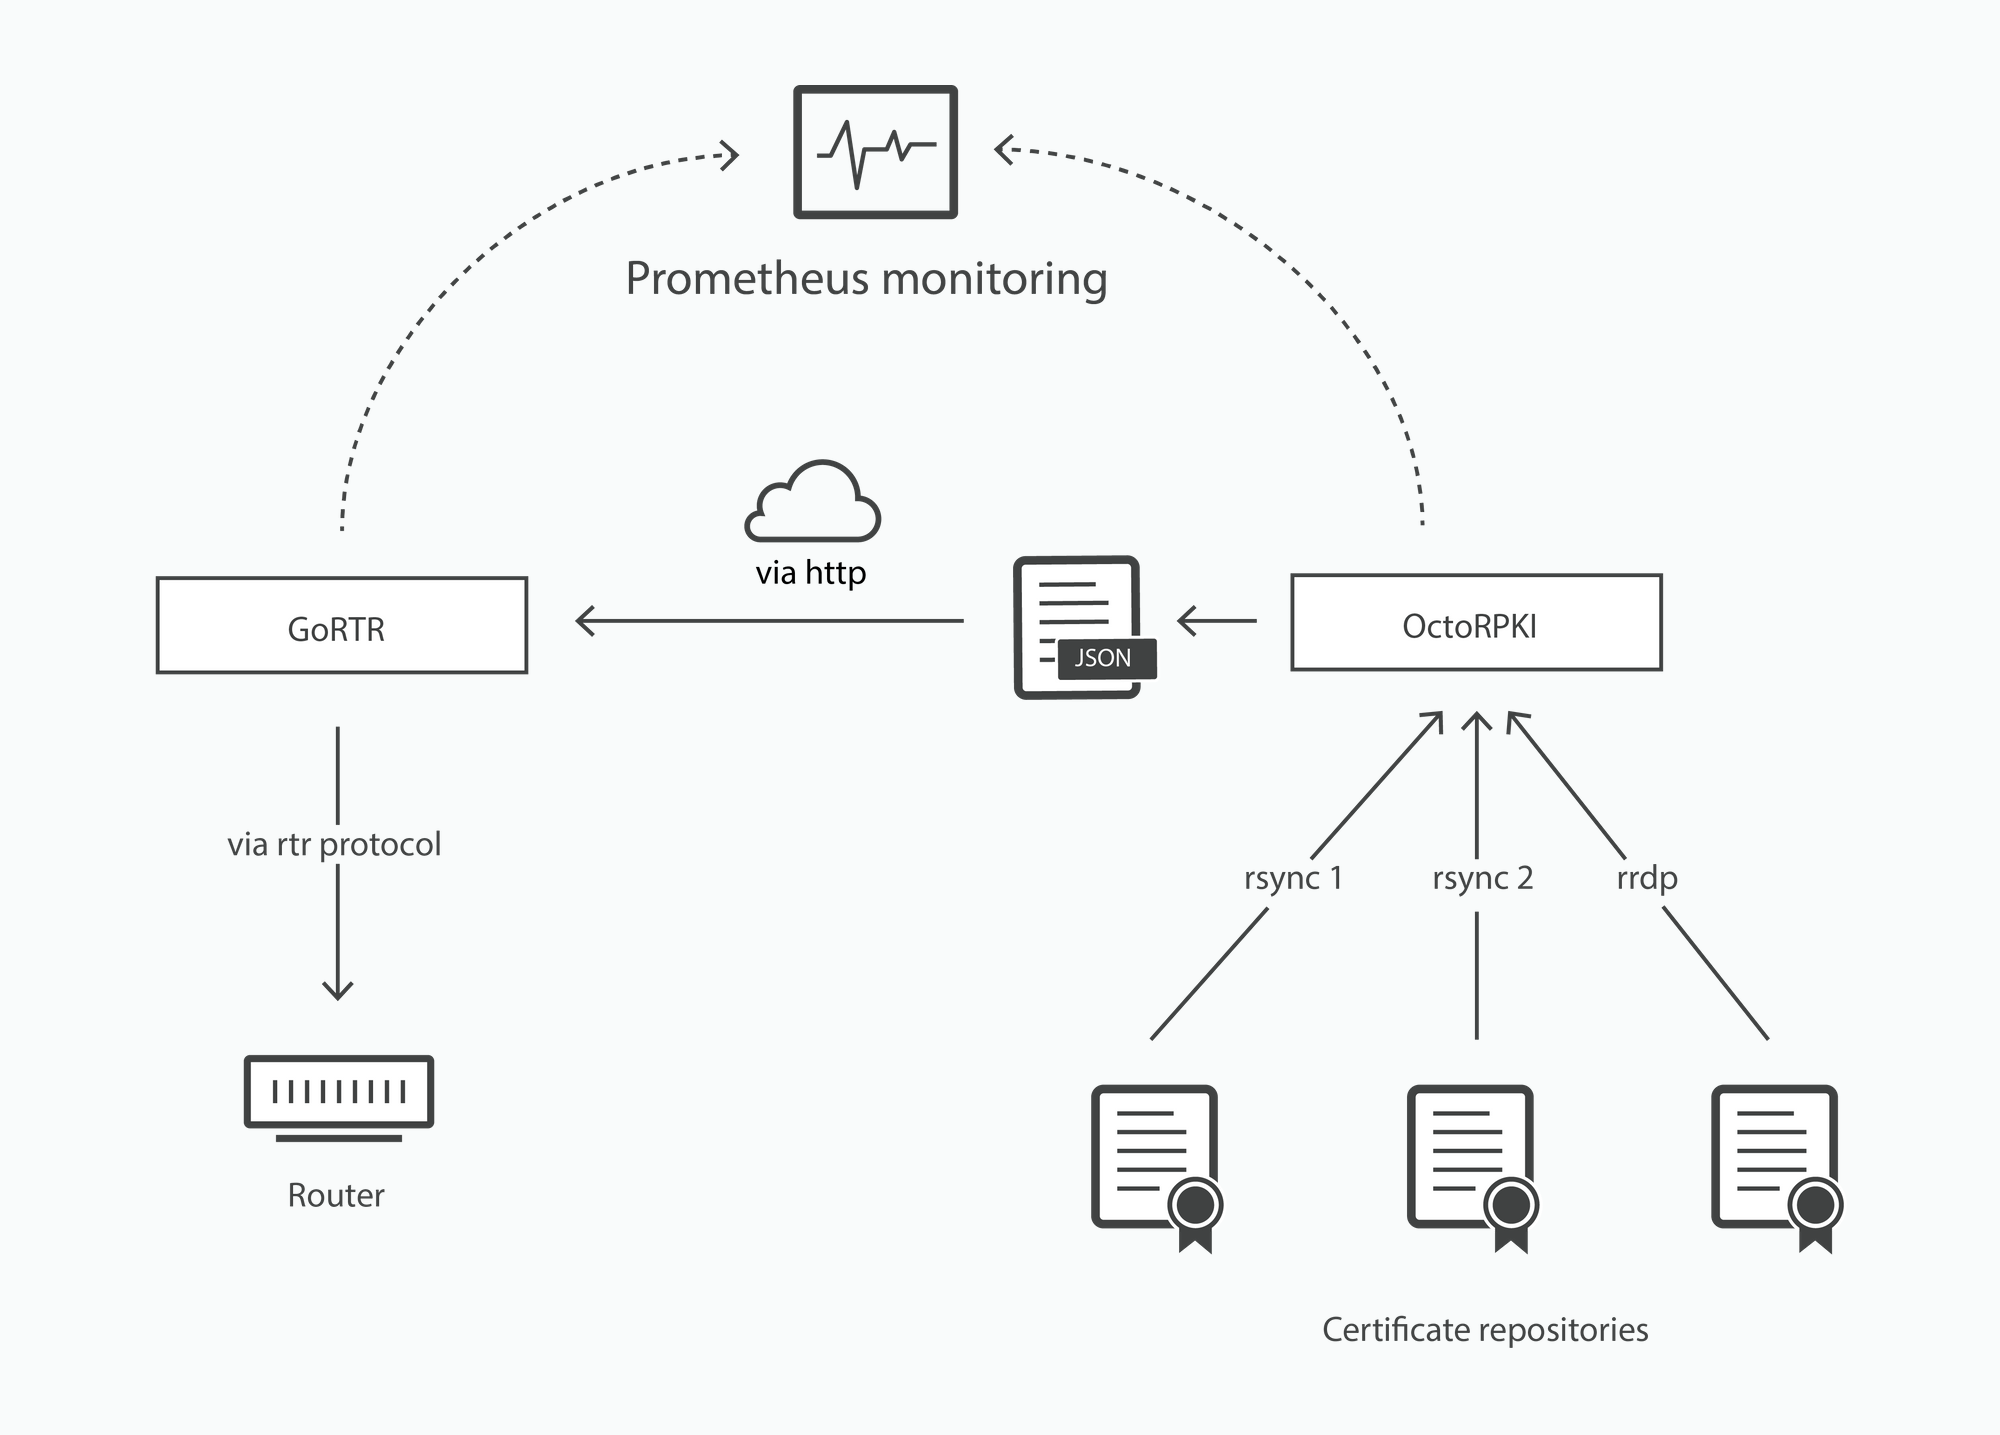 OctoRPKI downloads a set of certificates from repositories and distributes them to GoRTR